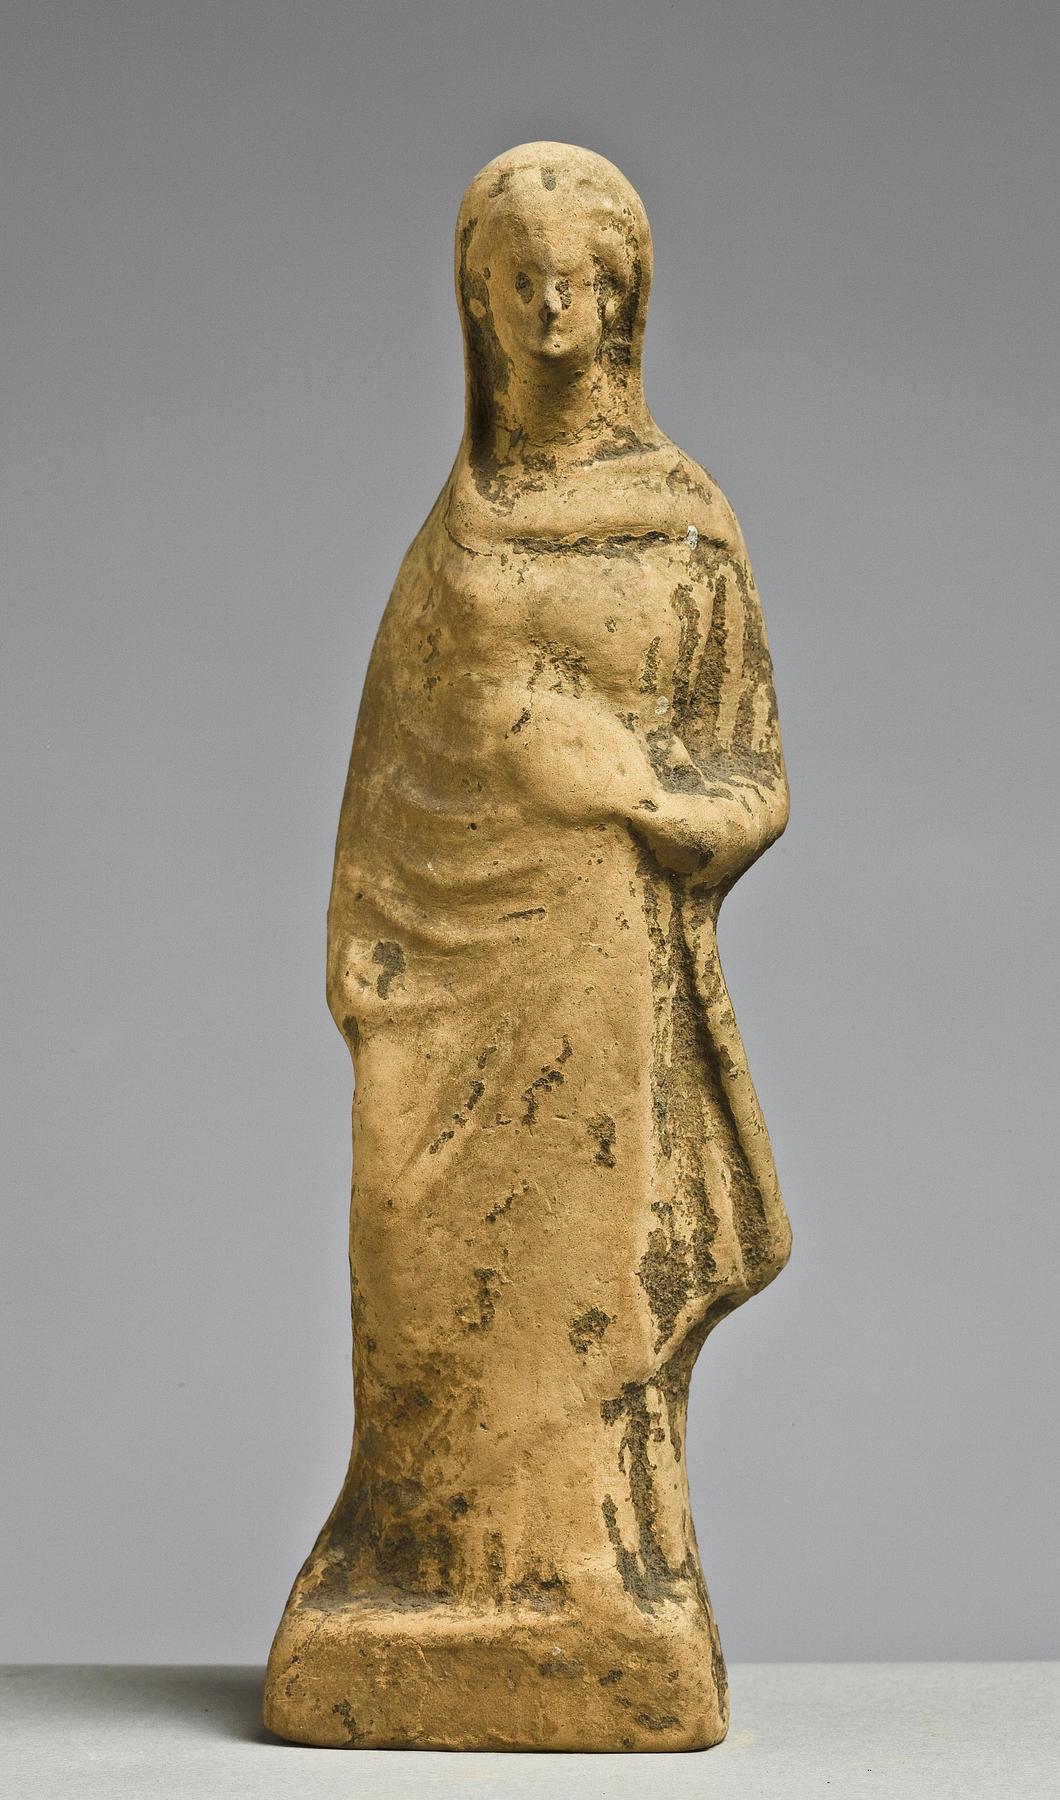 Statuette of a woman, H1020